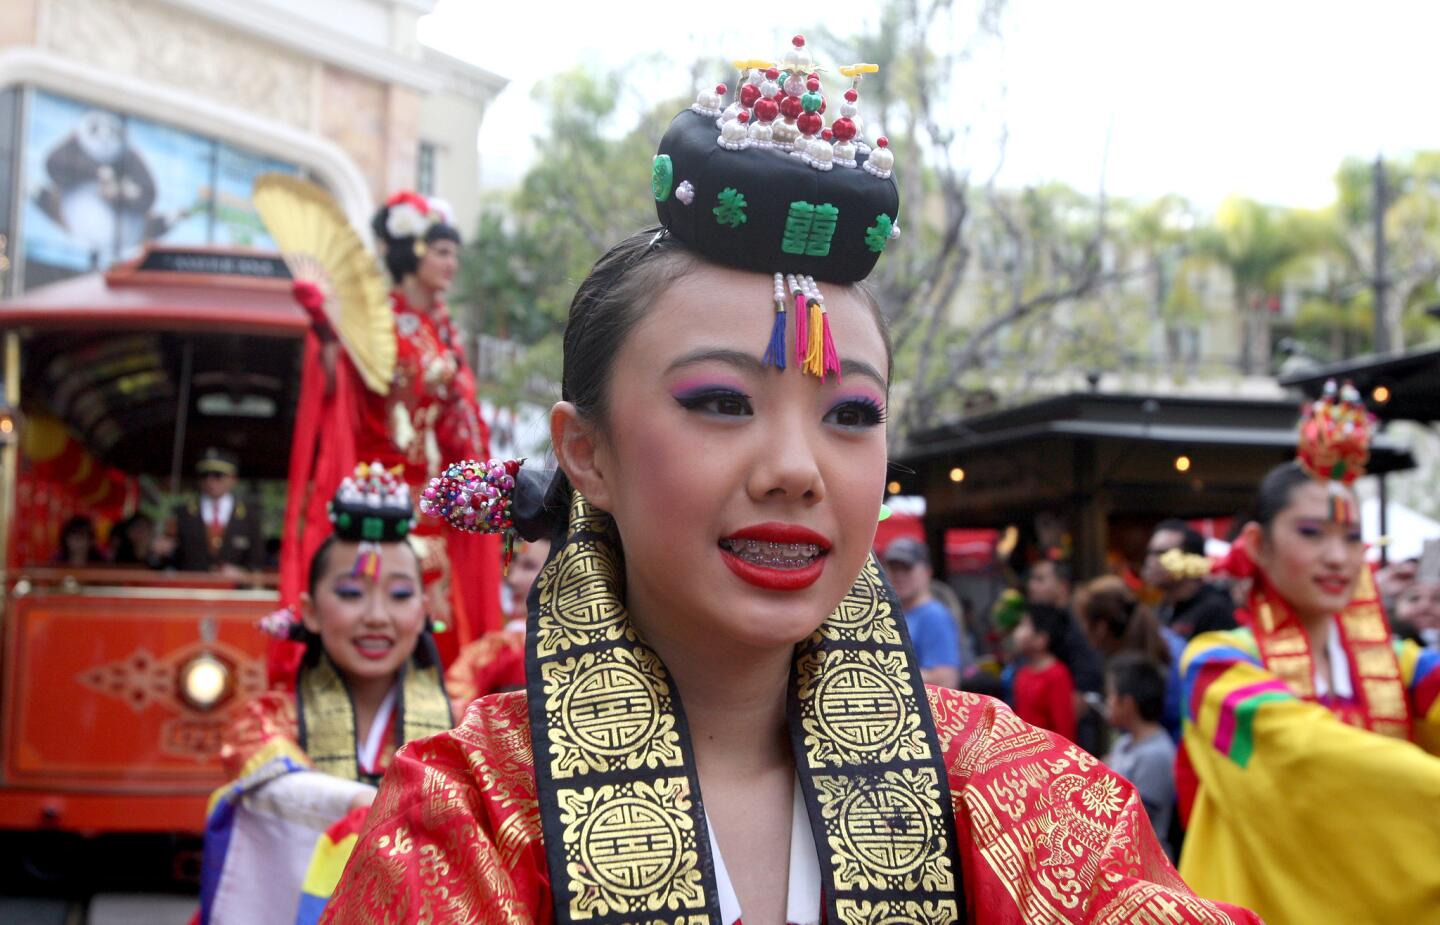 Photo Gallery: Americana at Brand celebrates Year of the Monkey, Lunar New year